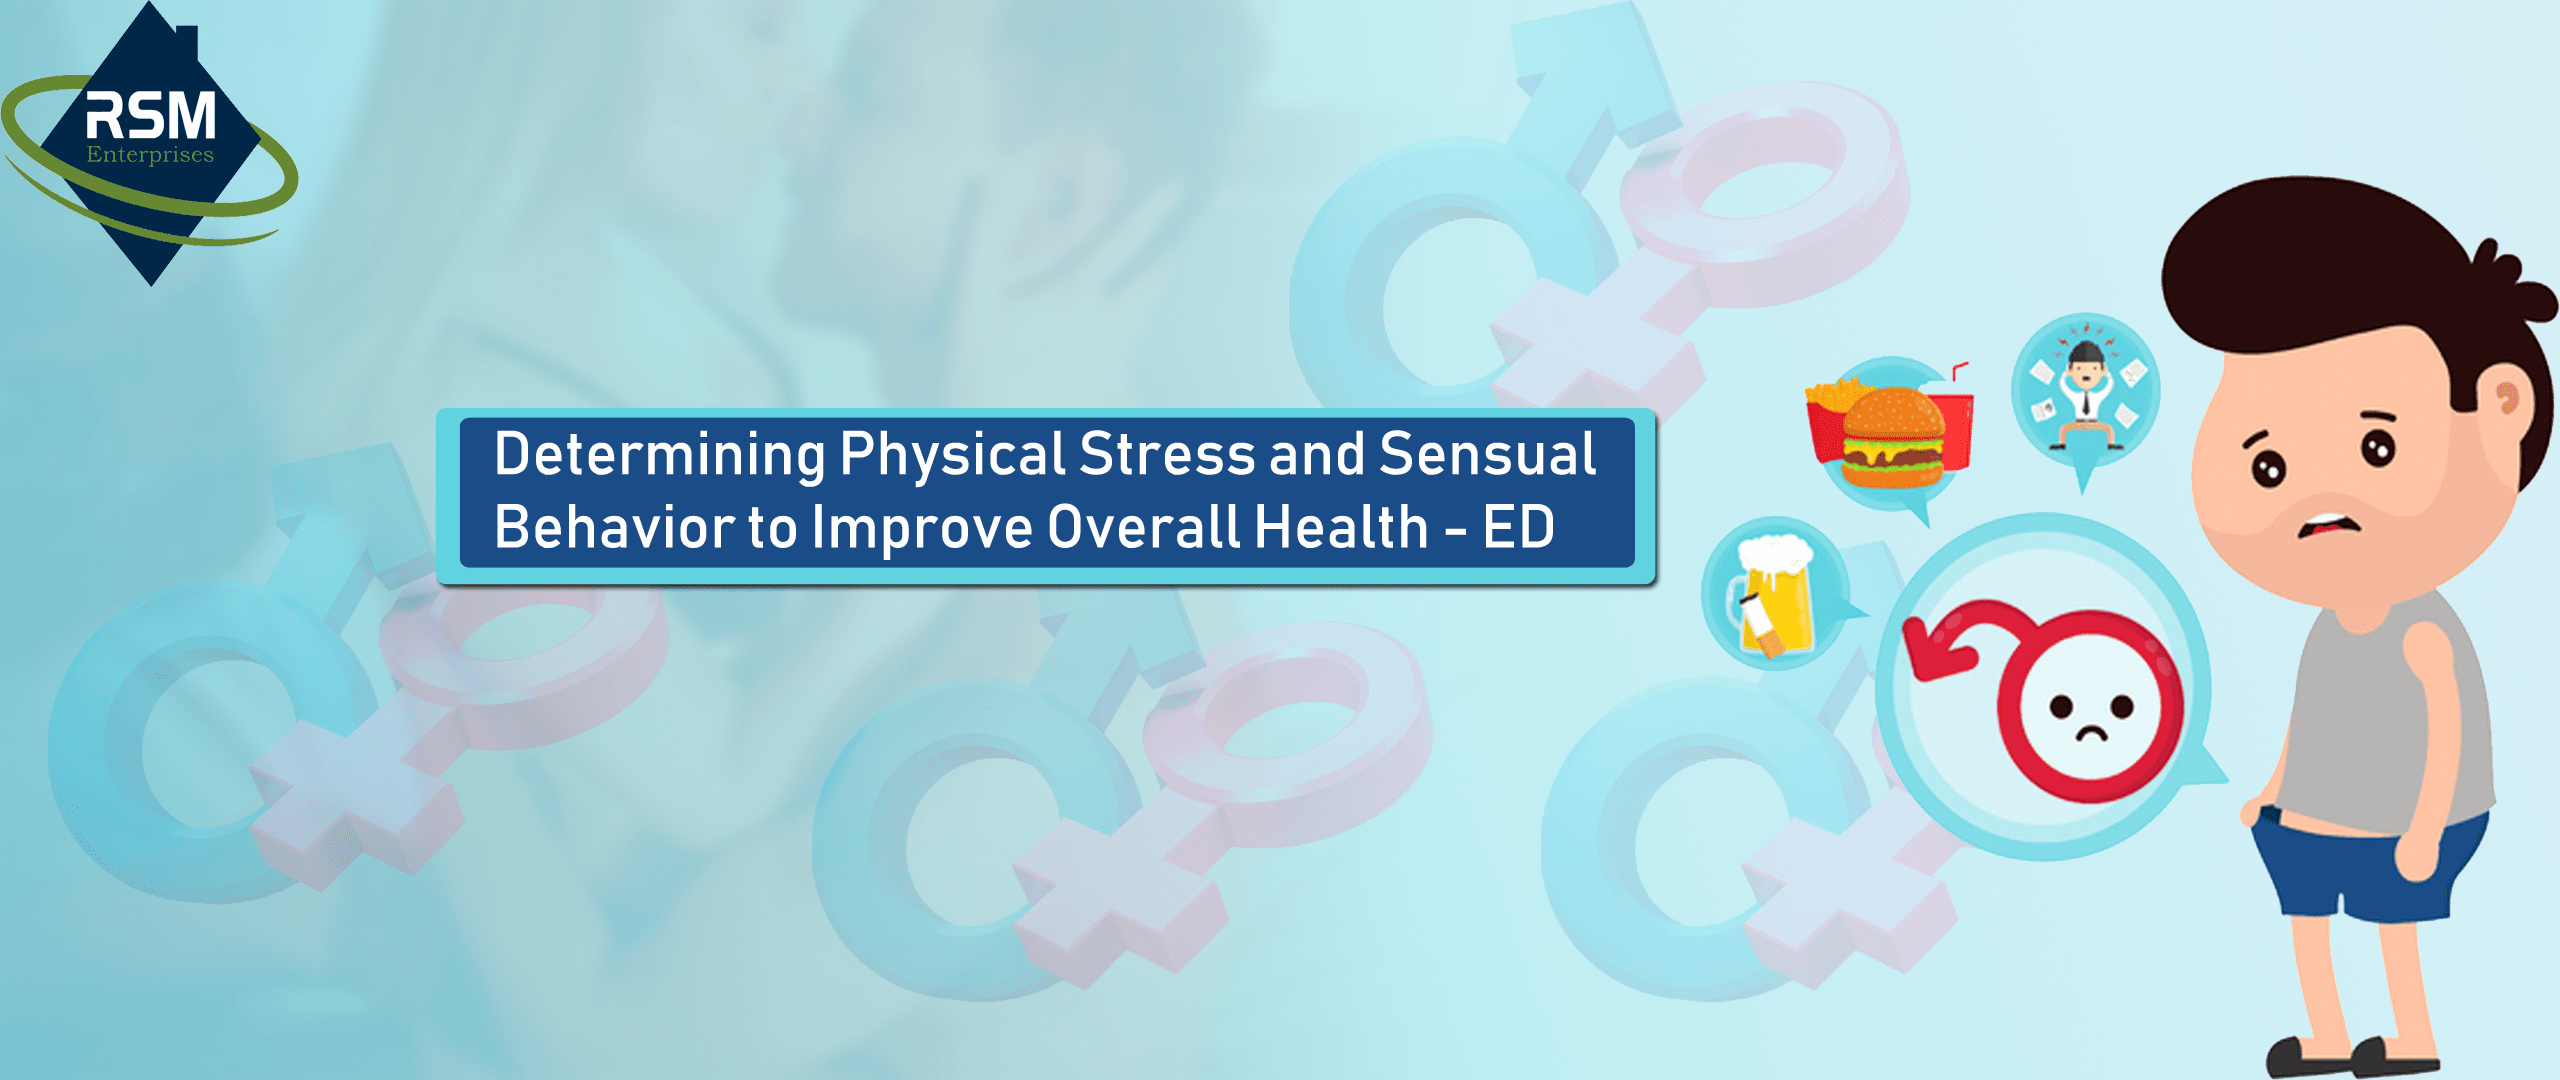 Determining Physical Stress and Behavior to Improve Overall Health - ED